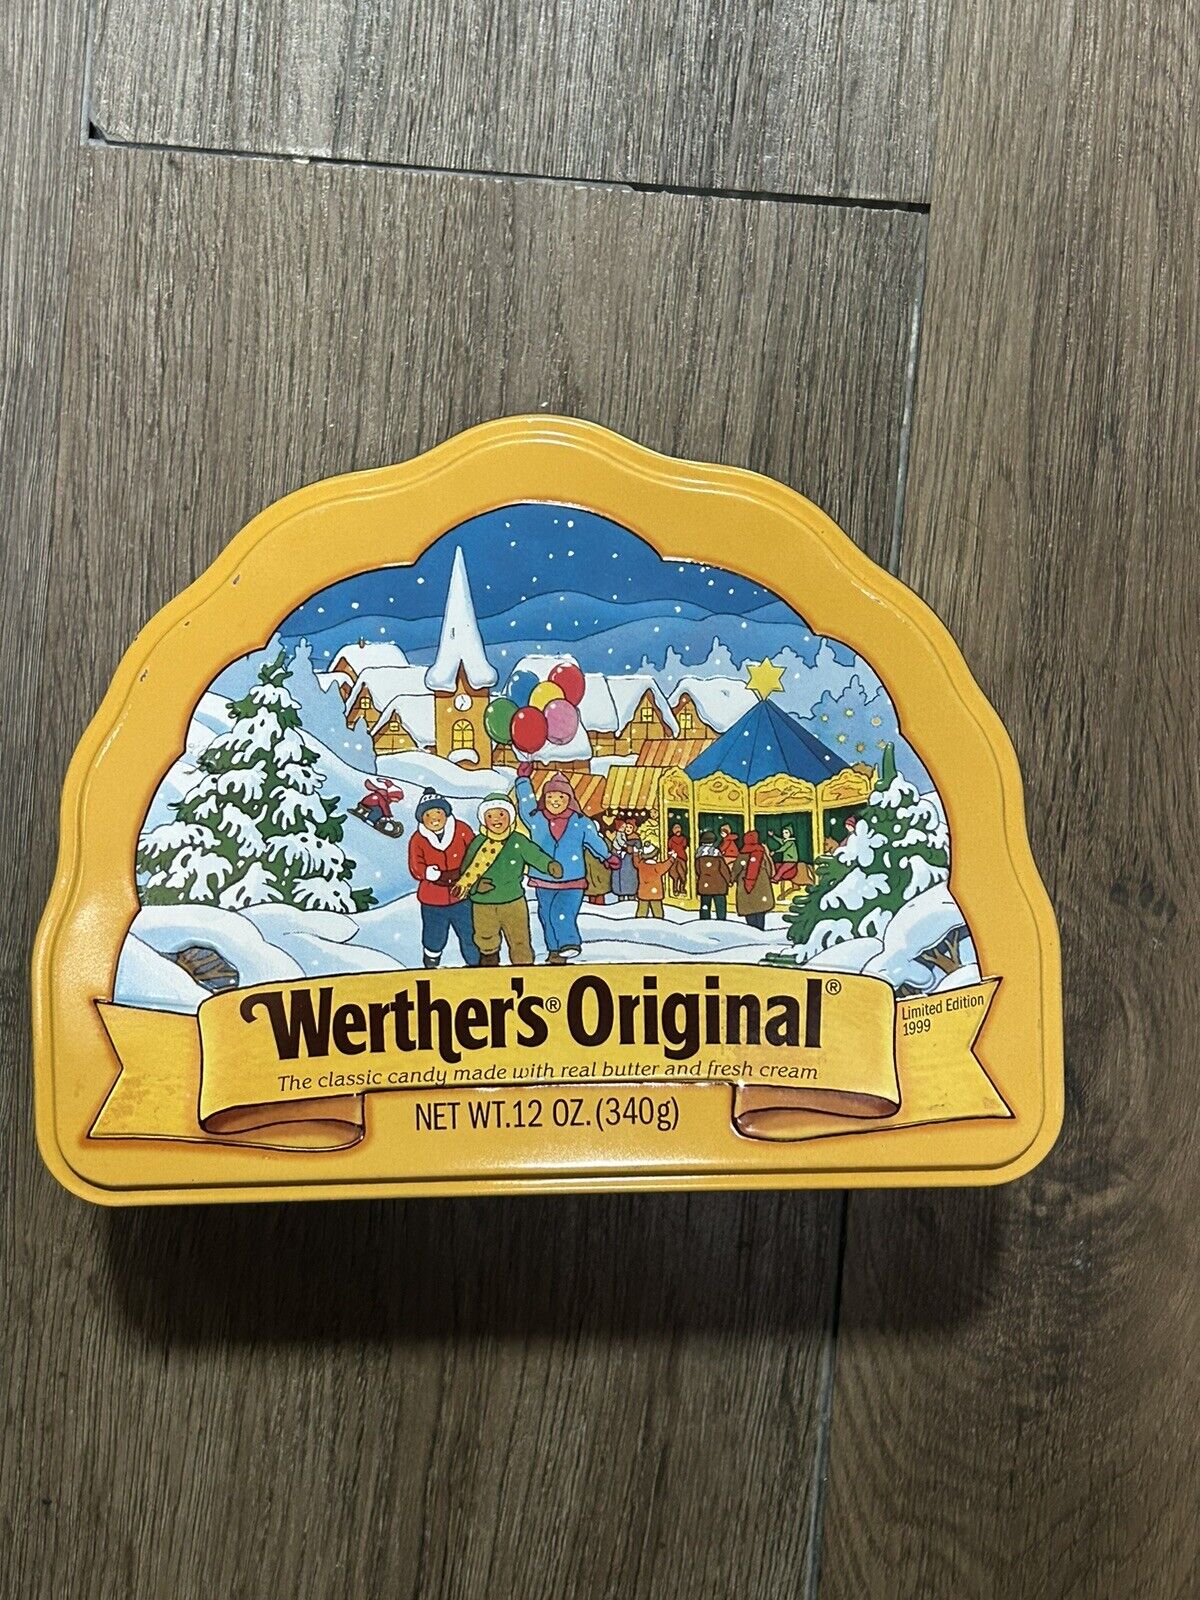 Vintage Werther's Original Butterscotch Tin Collectible Advertising Container